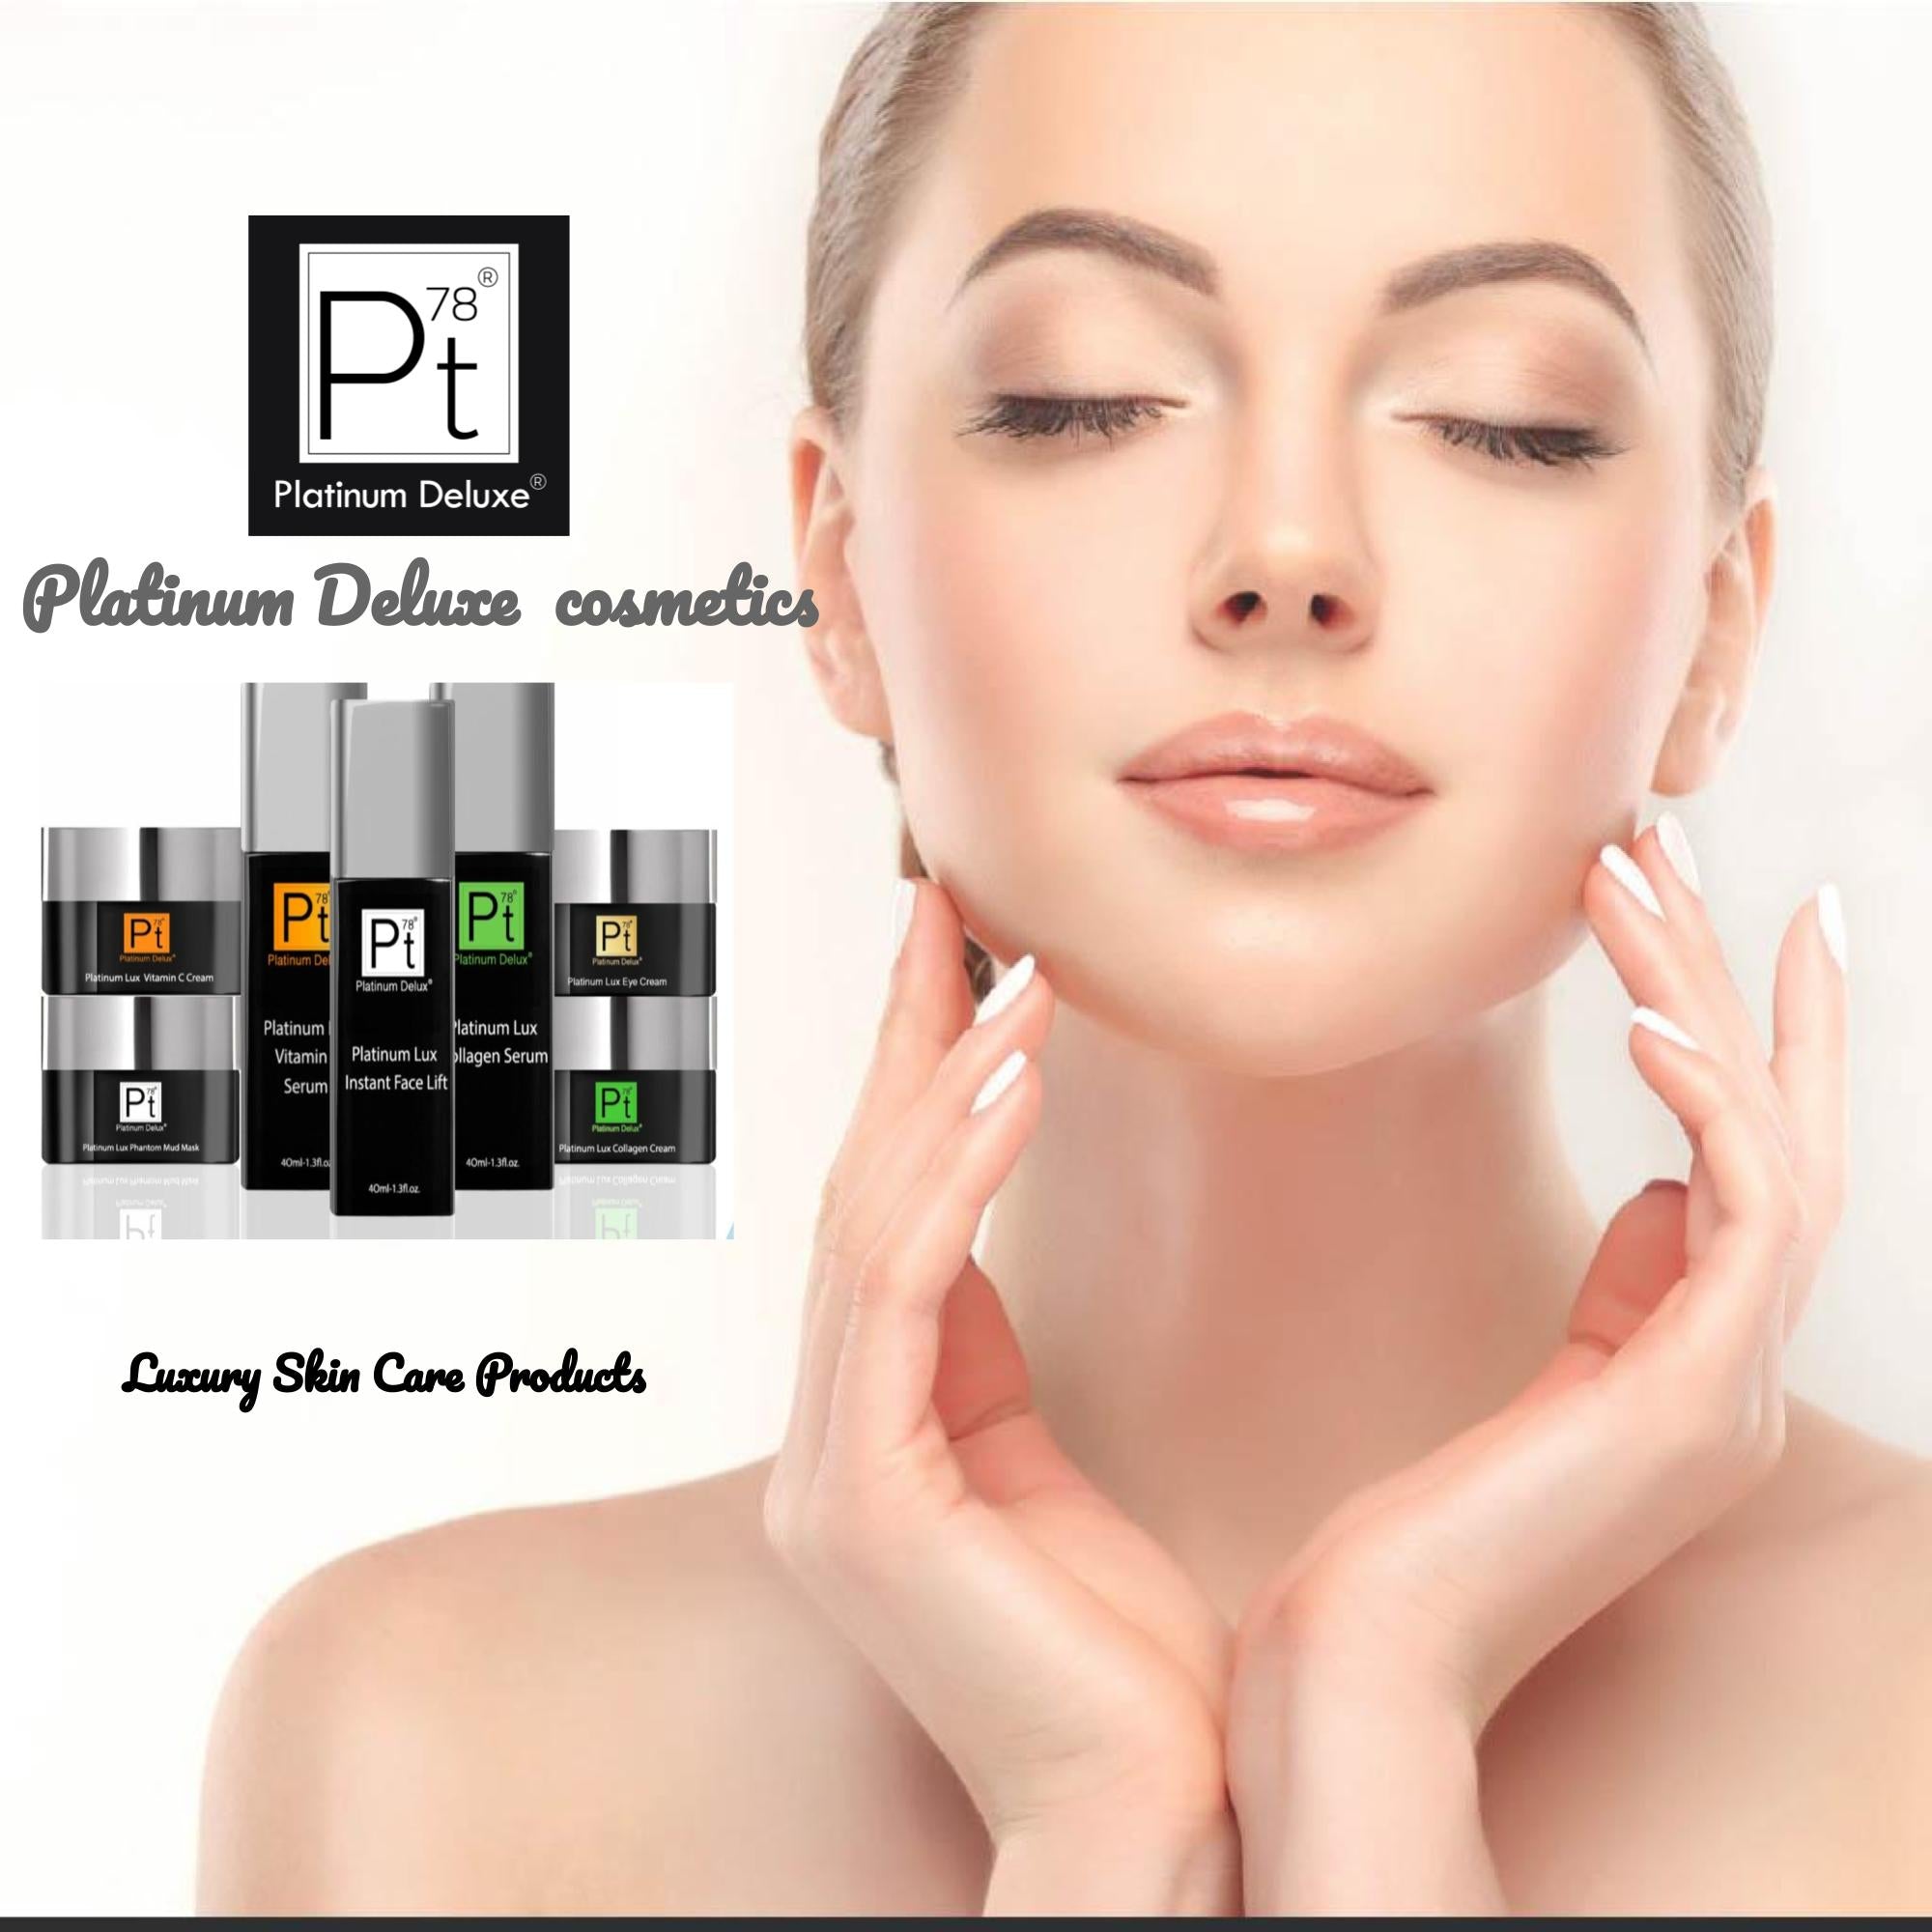  What is an instant face lift?   Platinum lux Instant Face Lift is a product name that refers to the temporary lifting effect this product has on human skin. In just moments after applying it, you'll experience younger looking skin, as the product appears to diminish fine lines and wrinkles, tightens, and firms. 5 Benefits of Platinum lux Instant Face Lift     If you're not satisfied with the way your skin is looking, and you have a busy life to lead, then the time may have come to consider instant facelifts. But what are these and how do they differ from conventional facelifts? This post will answer all these questions and more.   